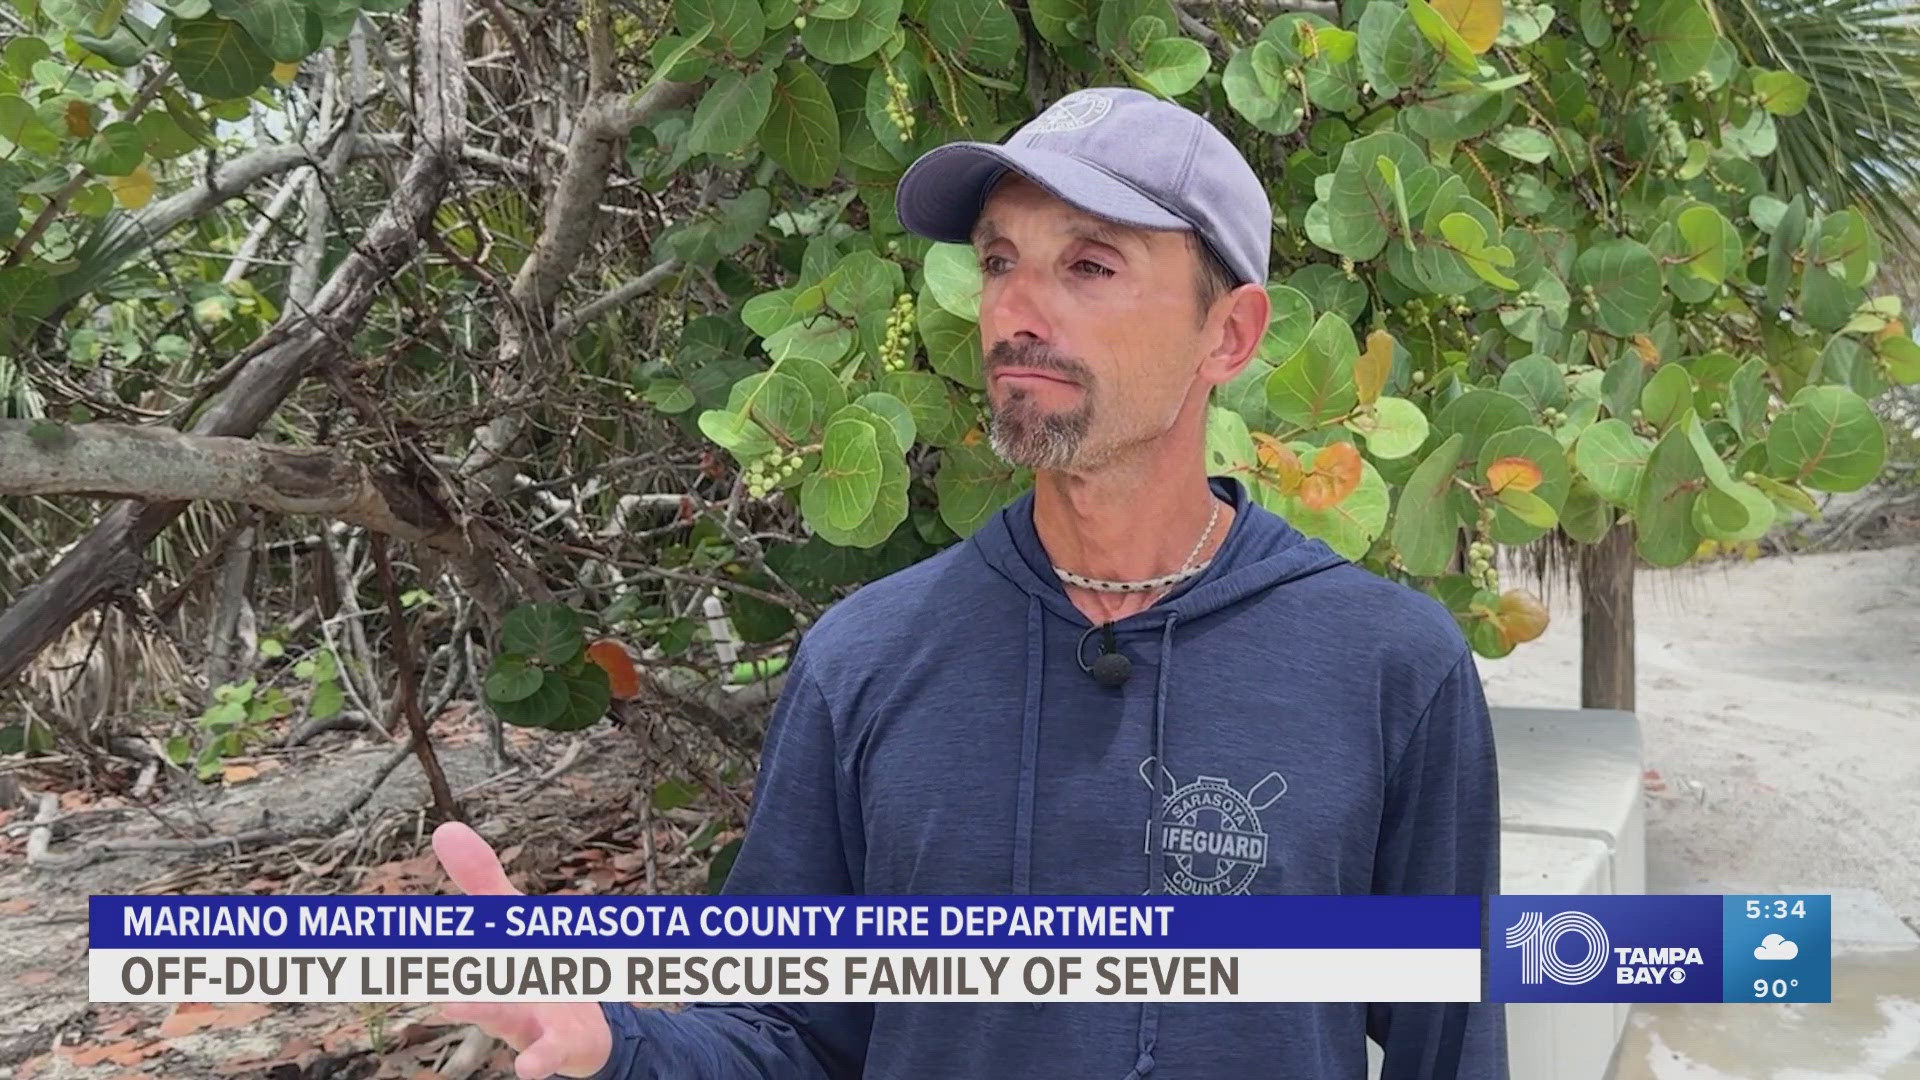 The lifeguard received a notification on his phone alerting him to a rescue call and immediately jumped into action to save seven people from drowning.